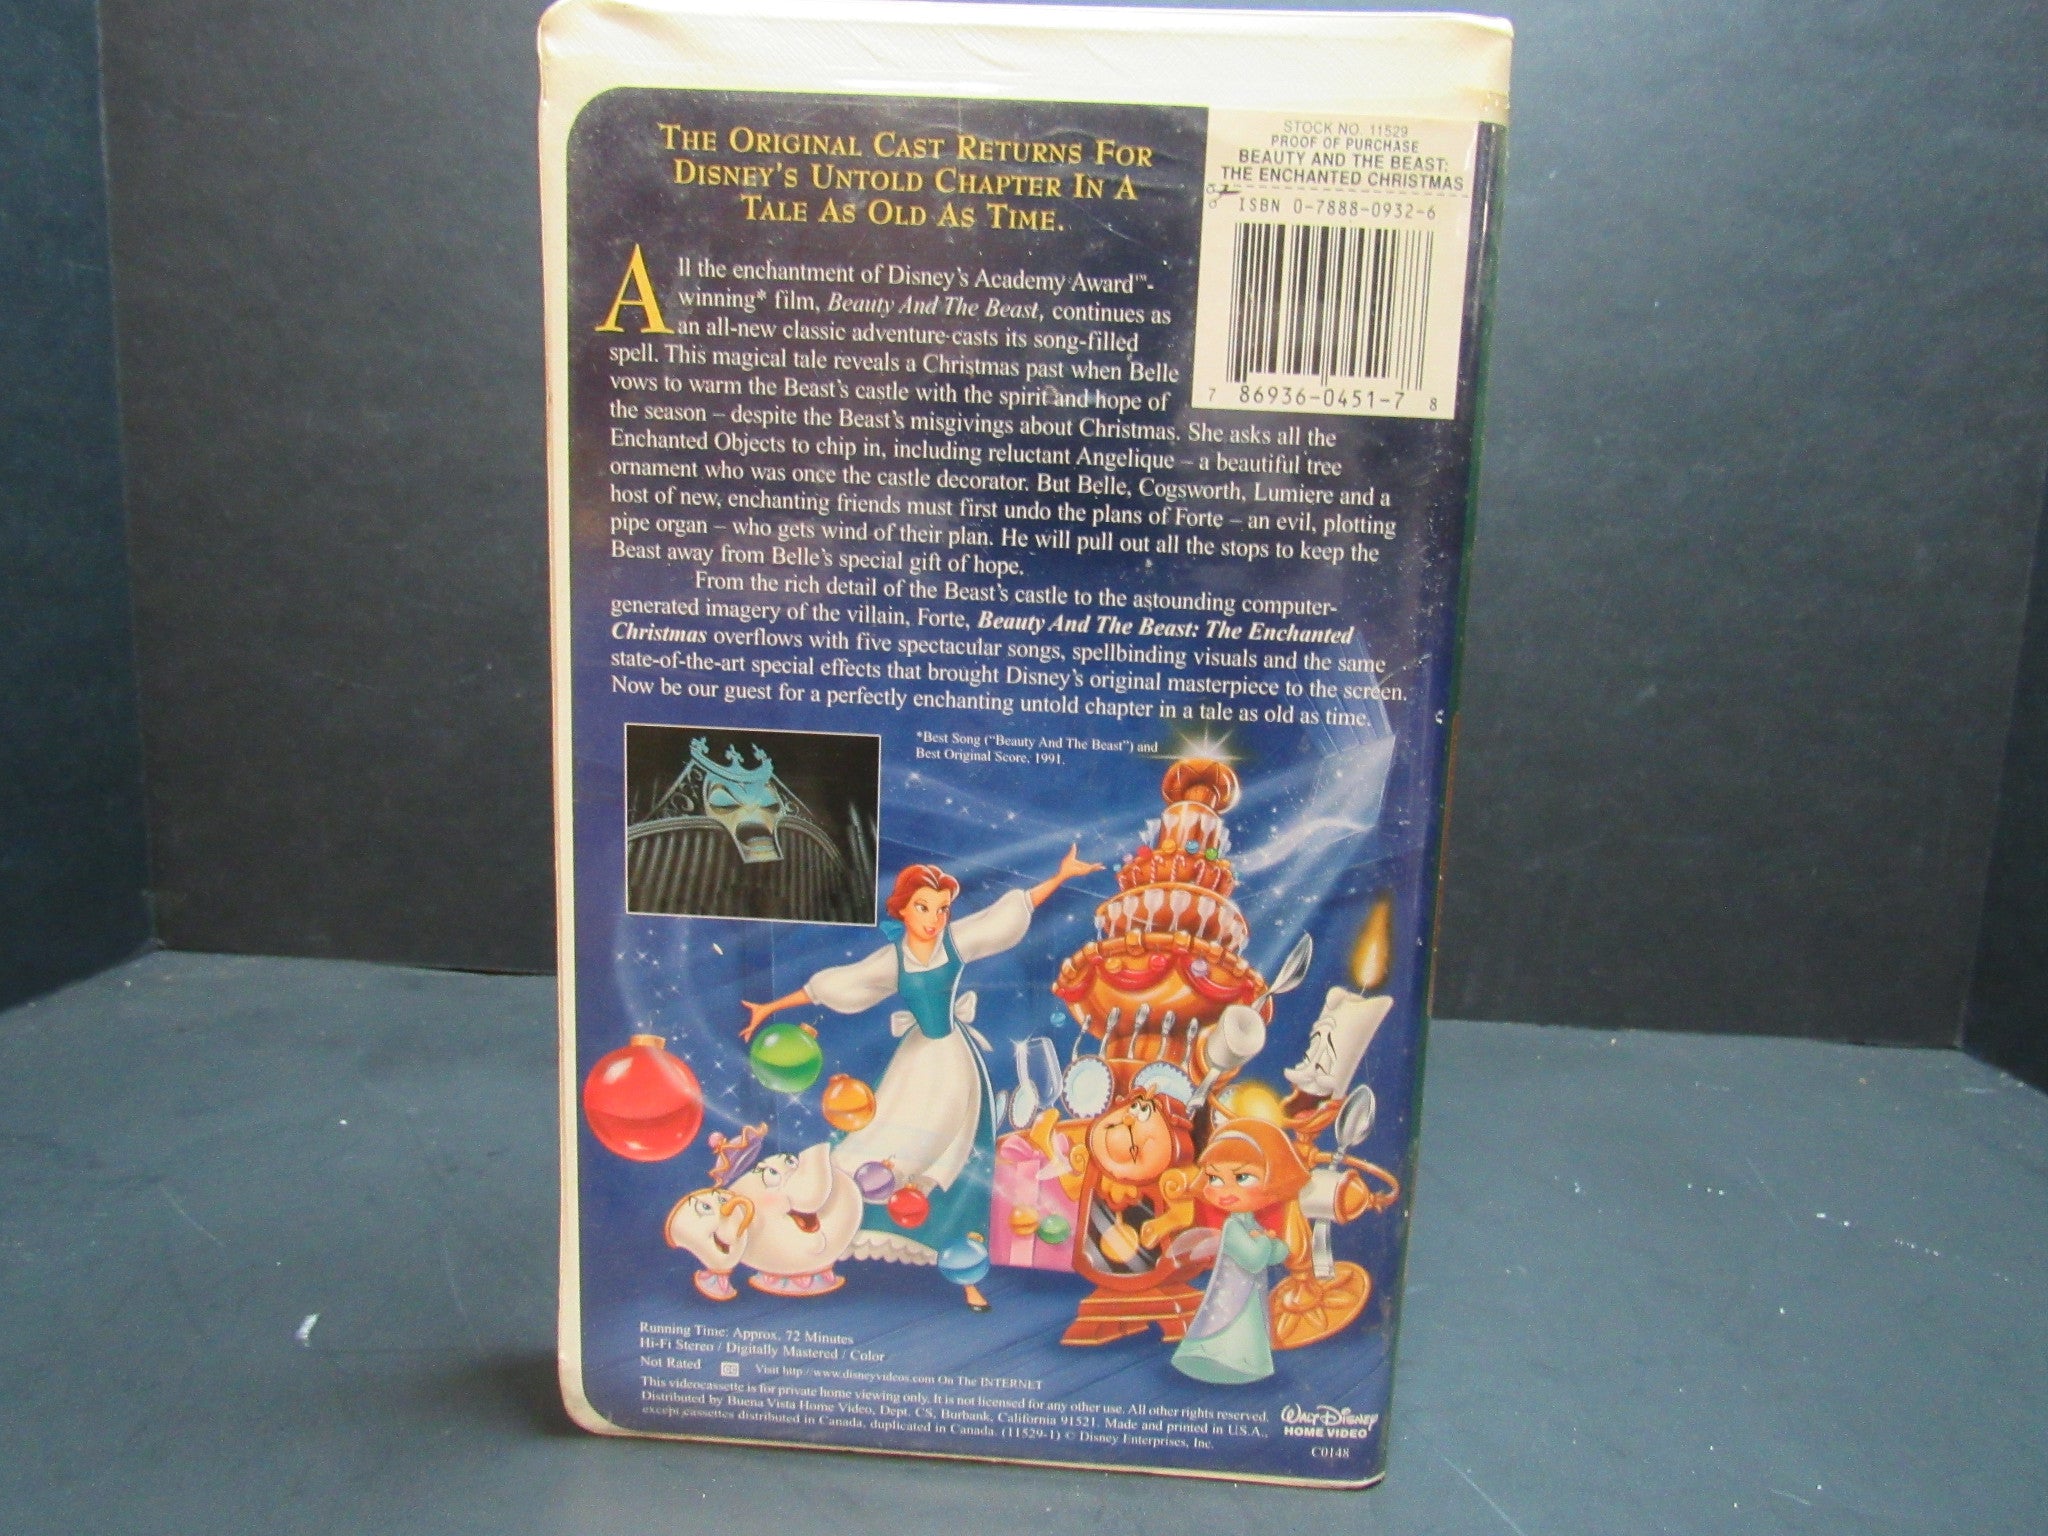 beauty and the beast the enchanted christmas vhs